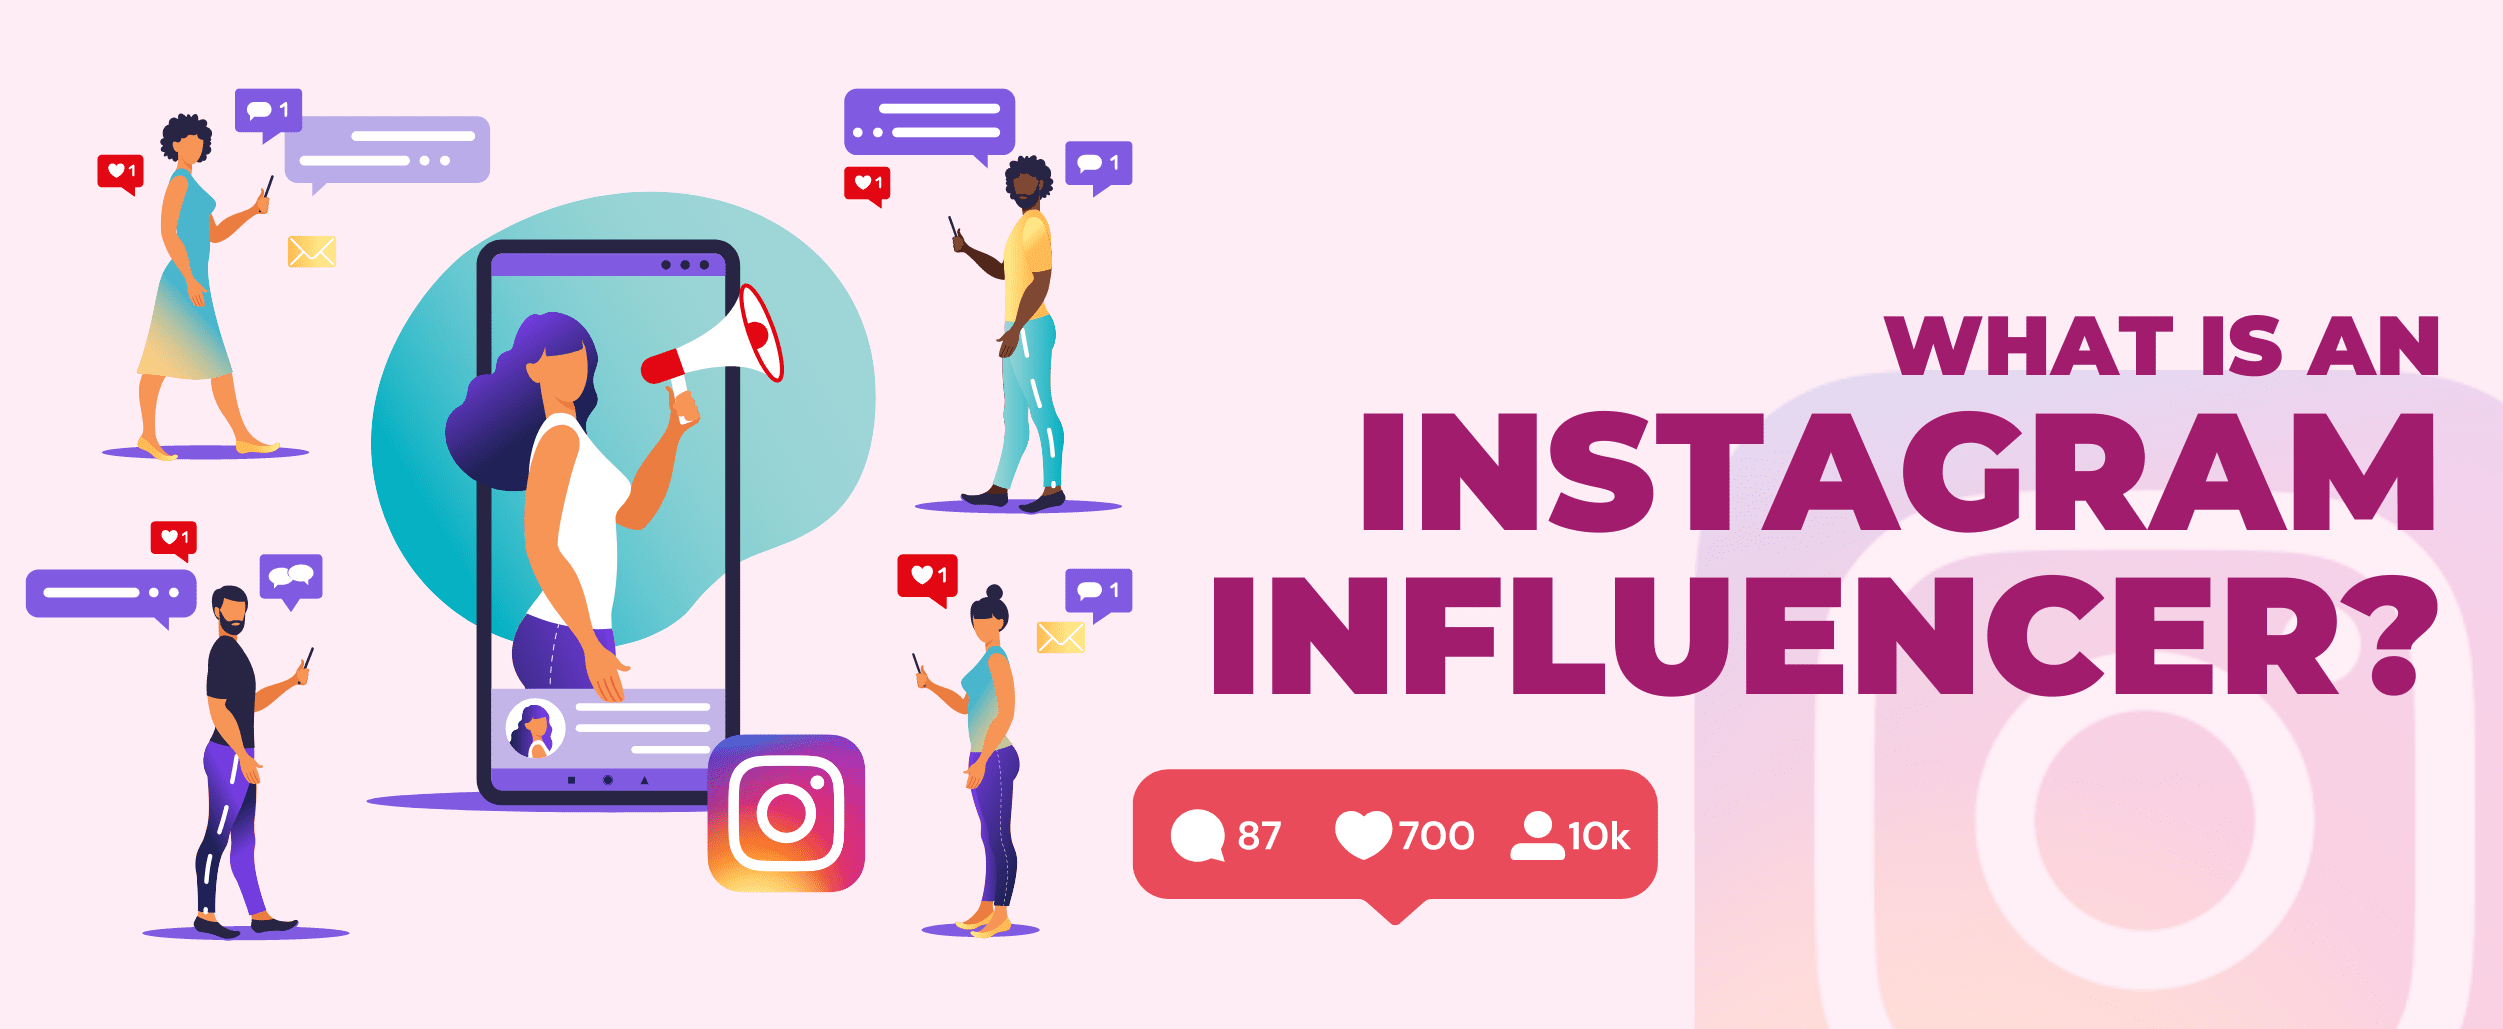 what is an instagram influencer